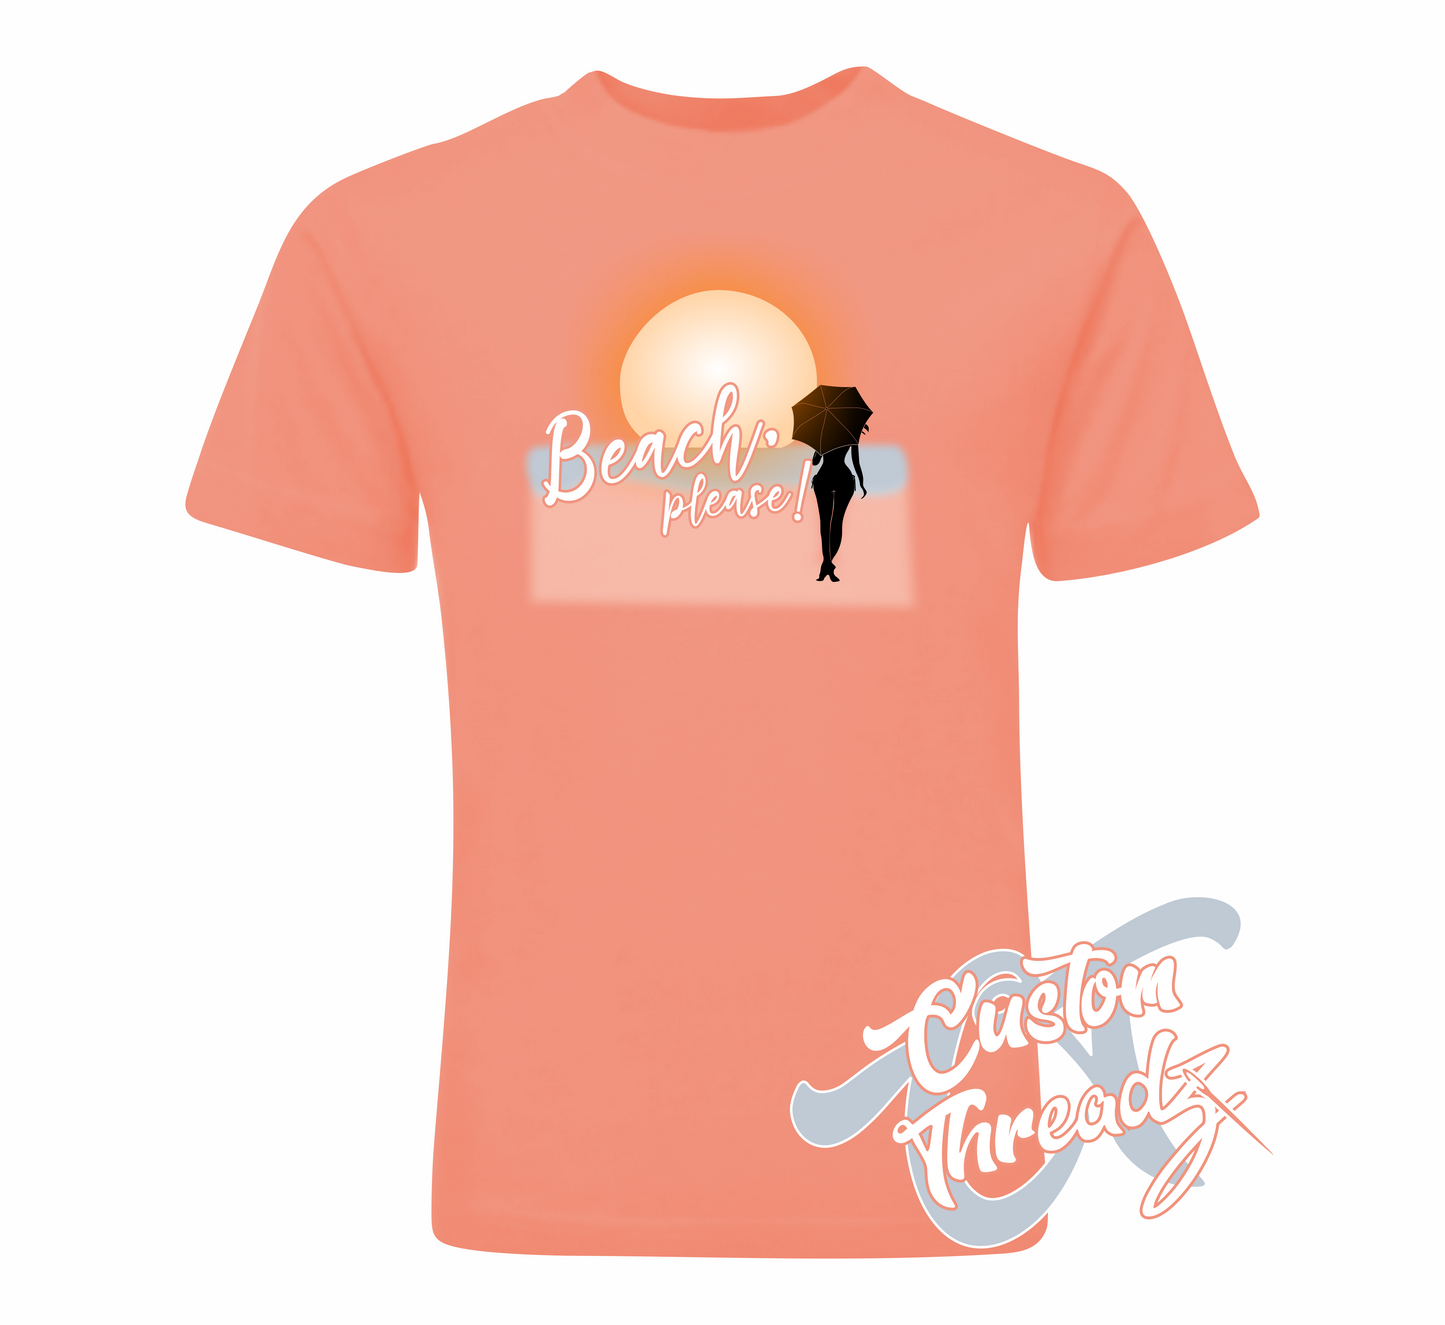 sunset t-shirt with beach please DTG printed design